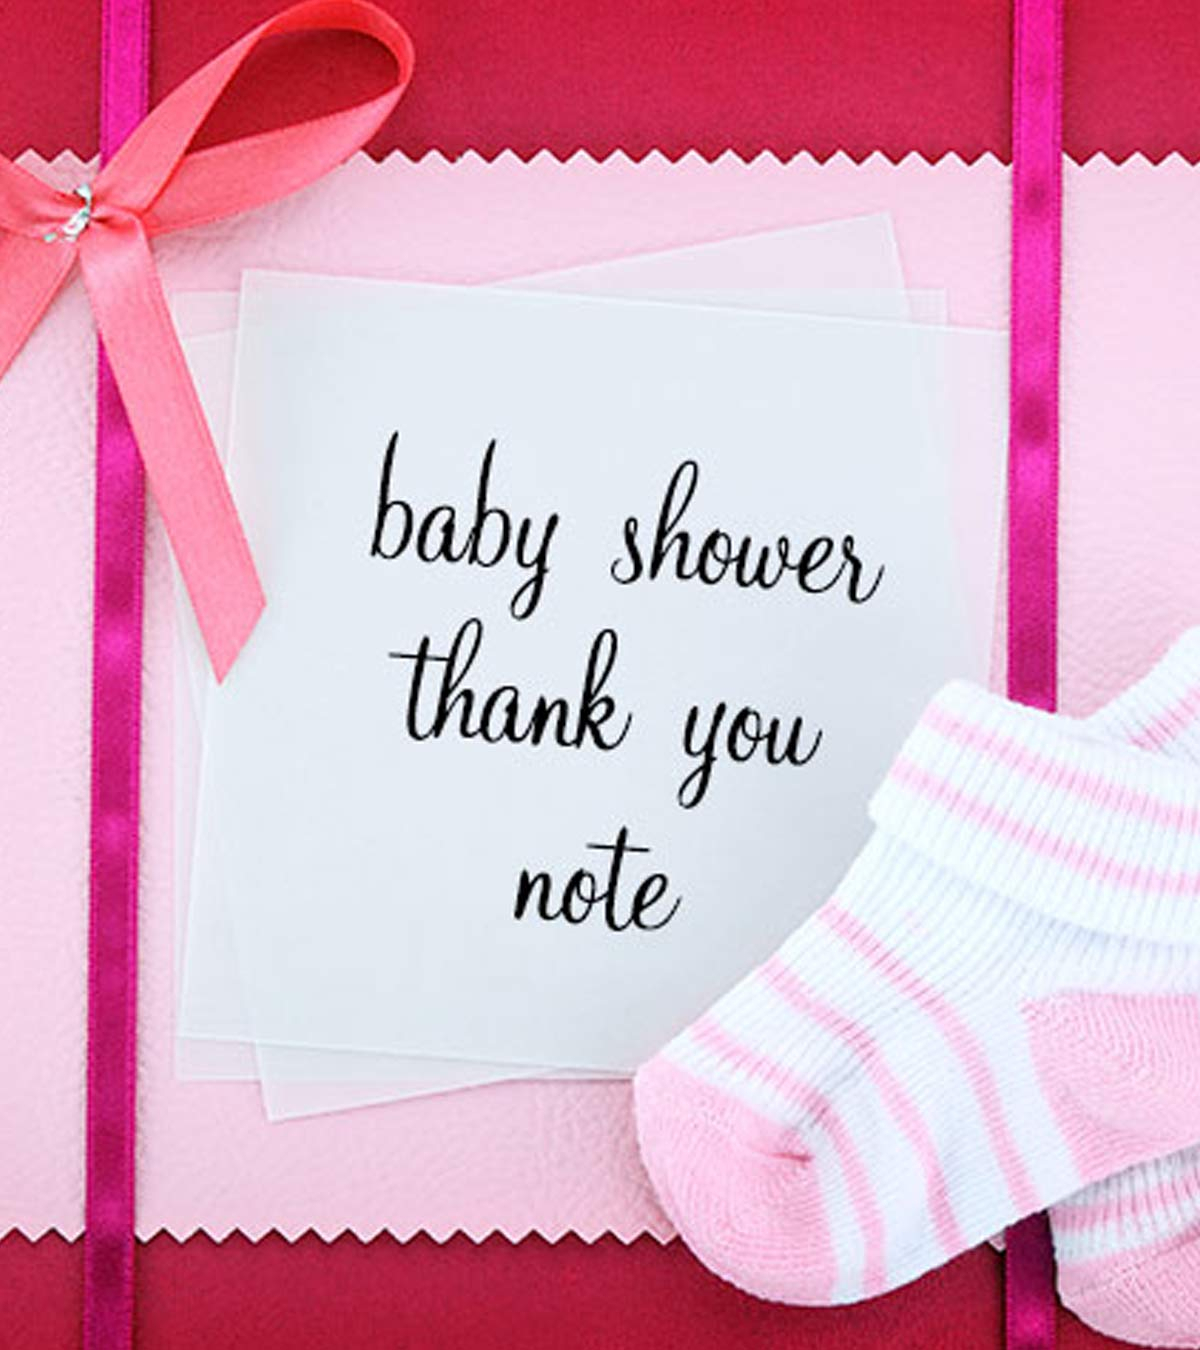 Baby Shower Thank You Notes: How To Write And What To Write Throughout Template For Baby Shower Thank You Cards